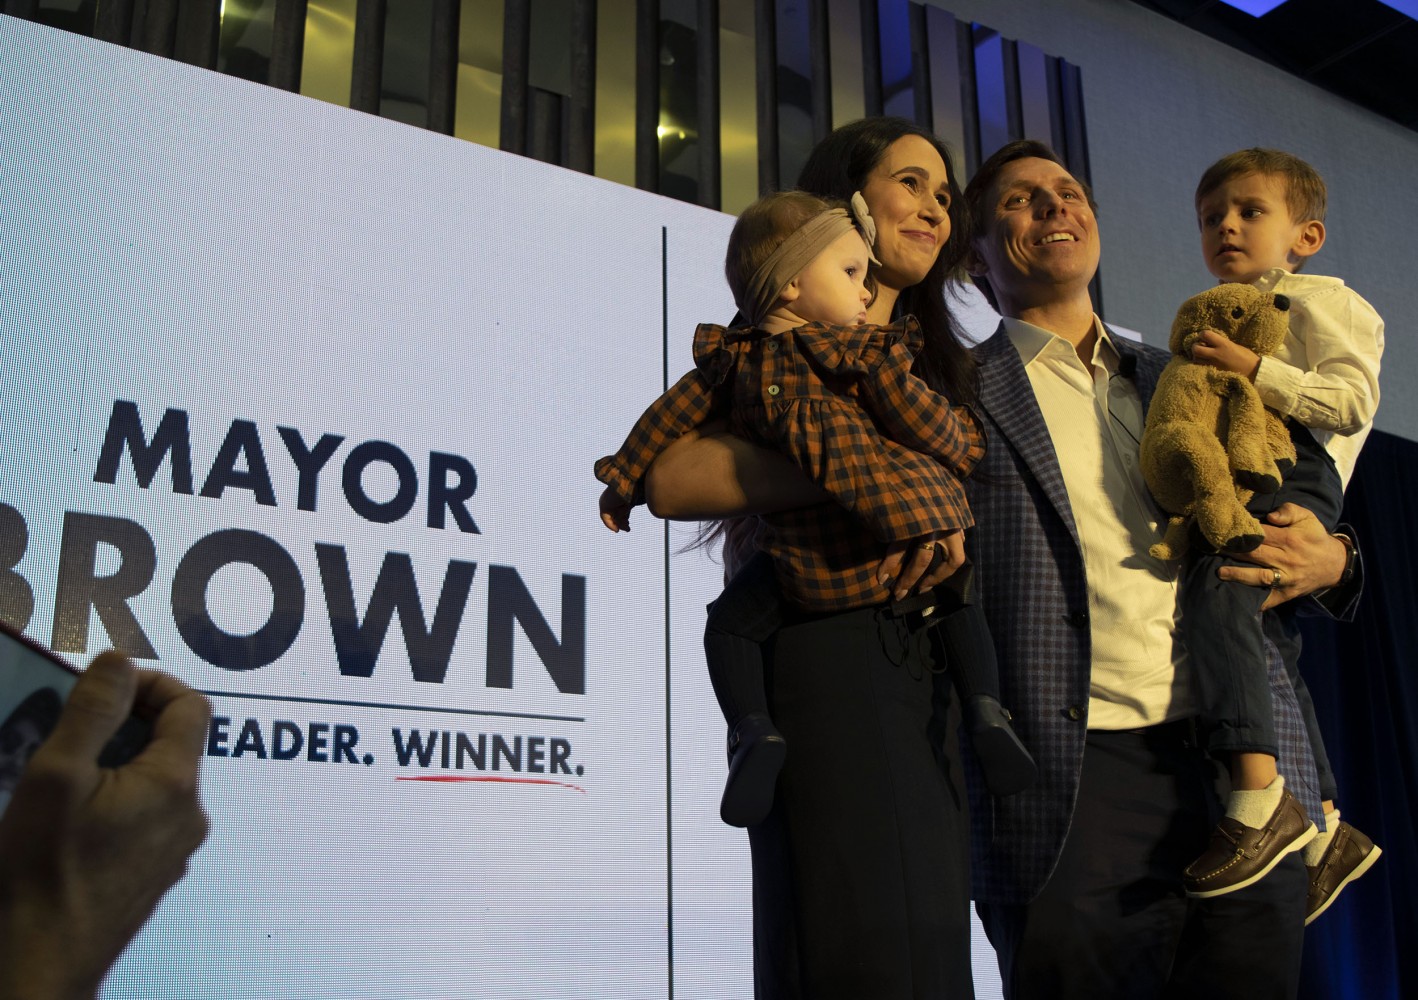 Patrick Brown’s sights are set on higher office, what does that mean for leadership in Brampton?